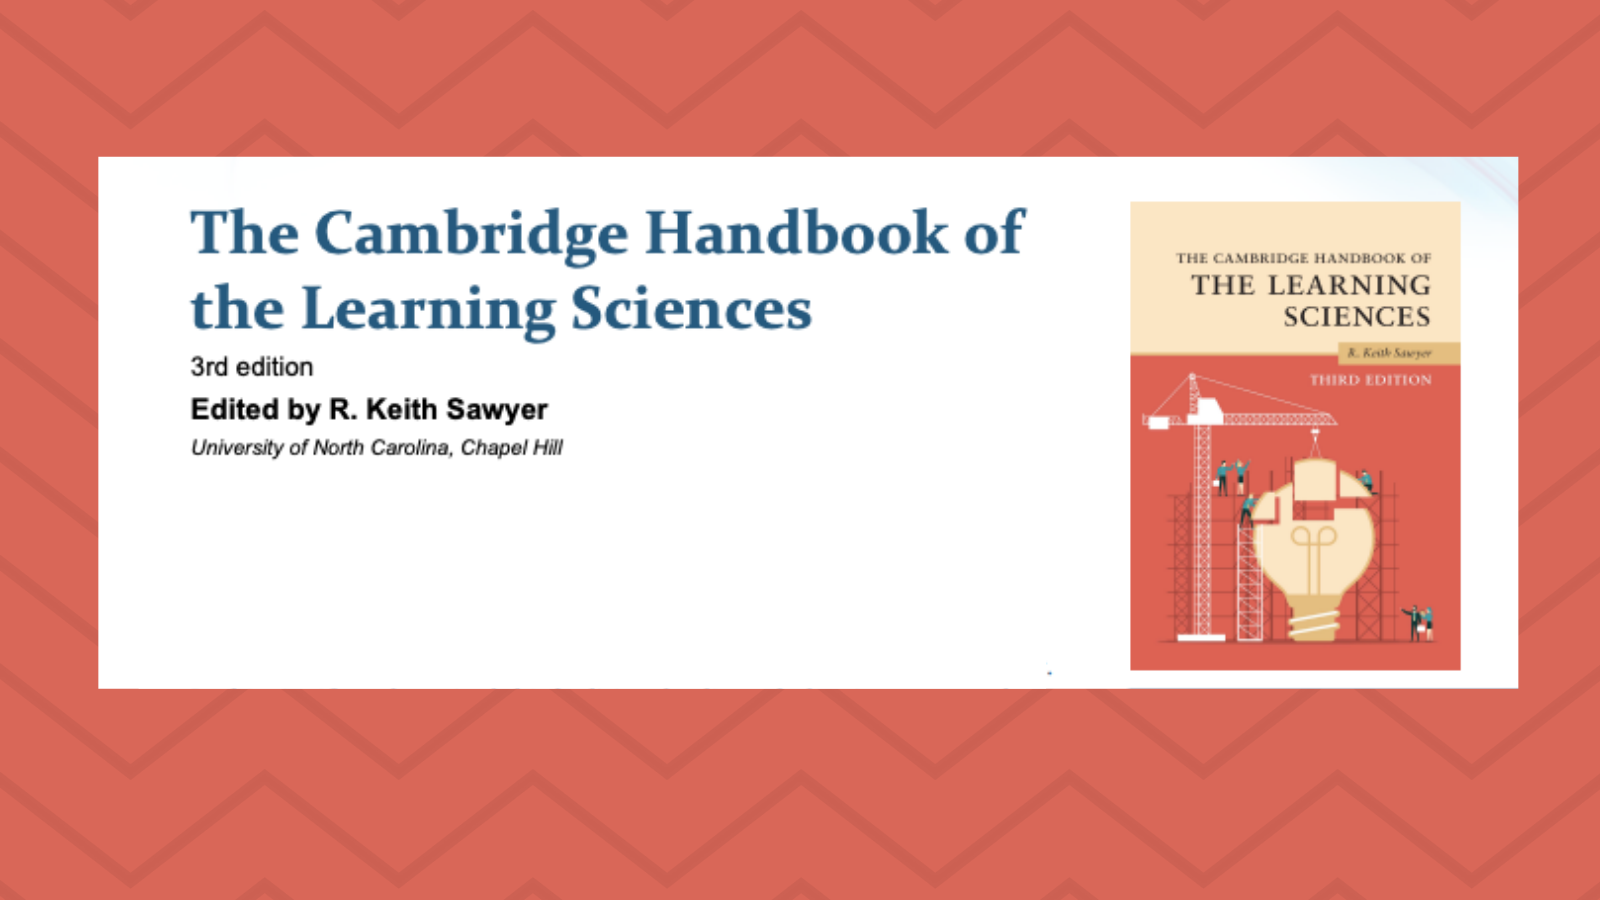 The Cambridge Handbook of the Learning Sciences, 3rd edition, edited by R. Keith Sawyer, Univ. of North Carolina, Chapel Hill